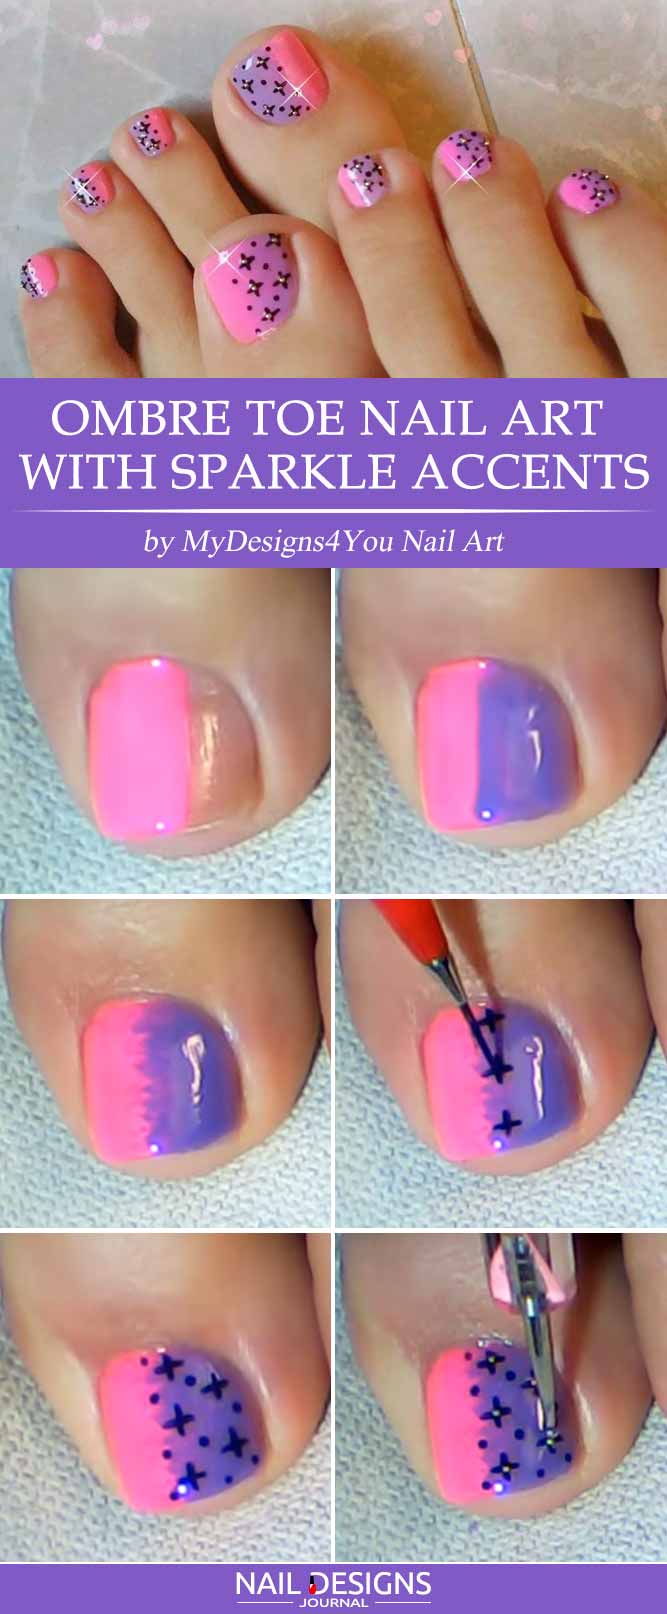 Ombre Toe Nail Art with Sparkle Accents